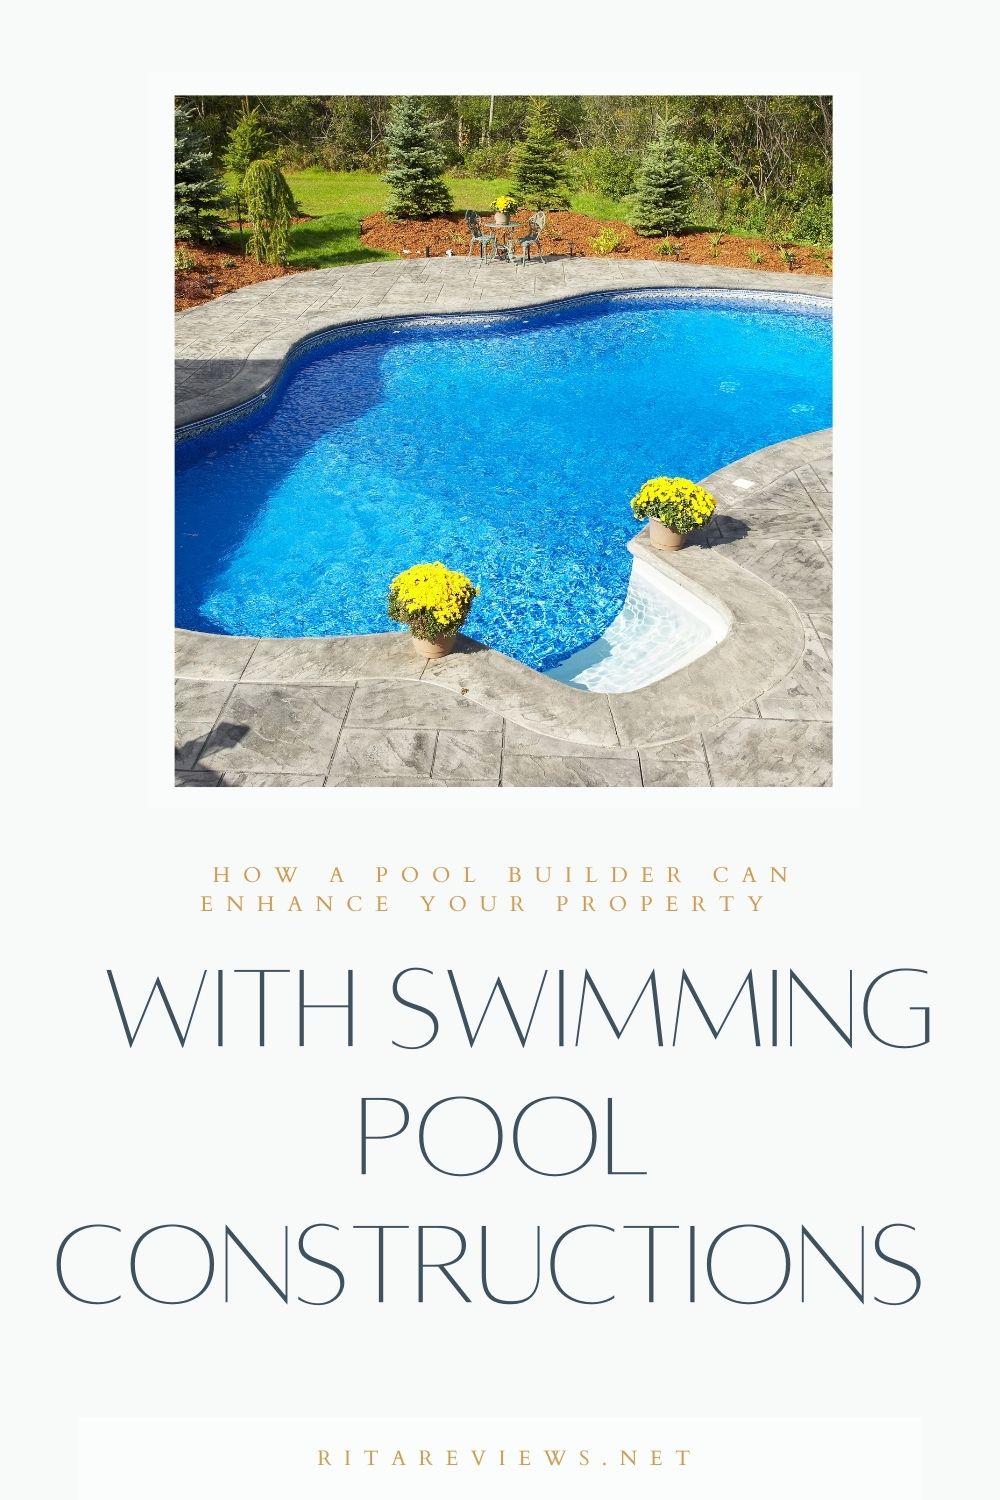 How A Pool Builder Can Enhance Your Property with Swimming Pool Constructions